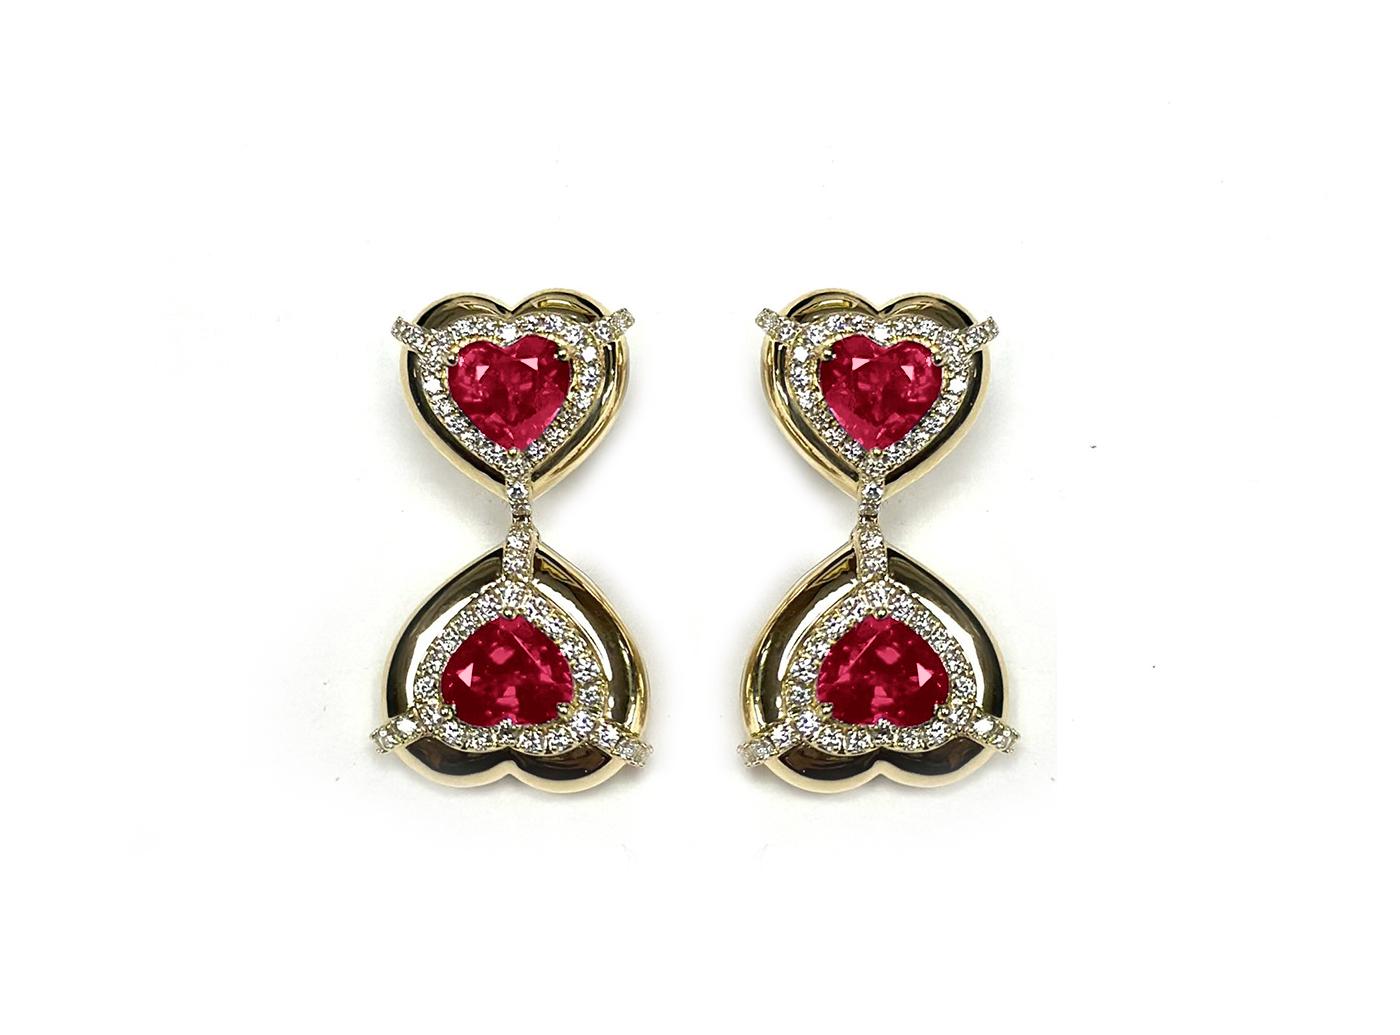 These Double Heart Shape Ruby Earrings with Diamonds in 18K Yellow Gold, part of the 'G-One' Collection, are a stunning display of elegance. These earrings showcase two heart-shaped rubies adorned with diamonds, set in 18K yellow gold. The design is